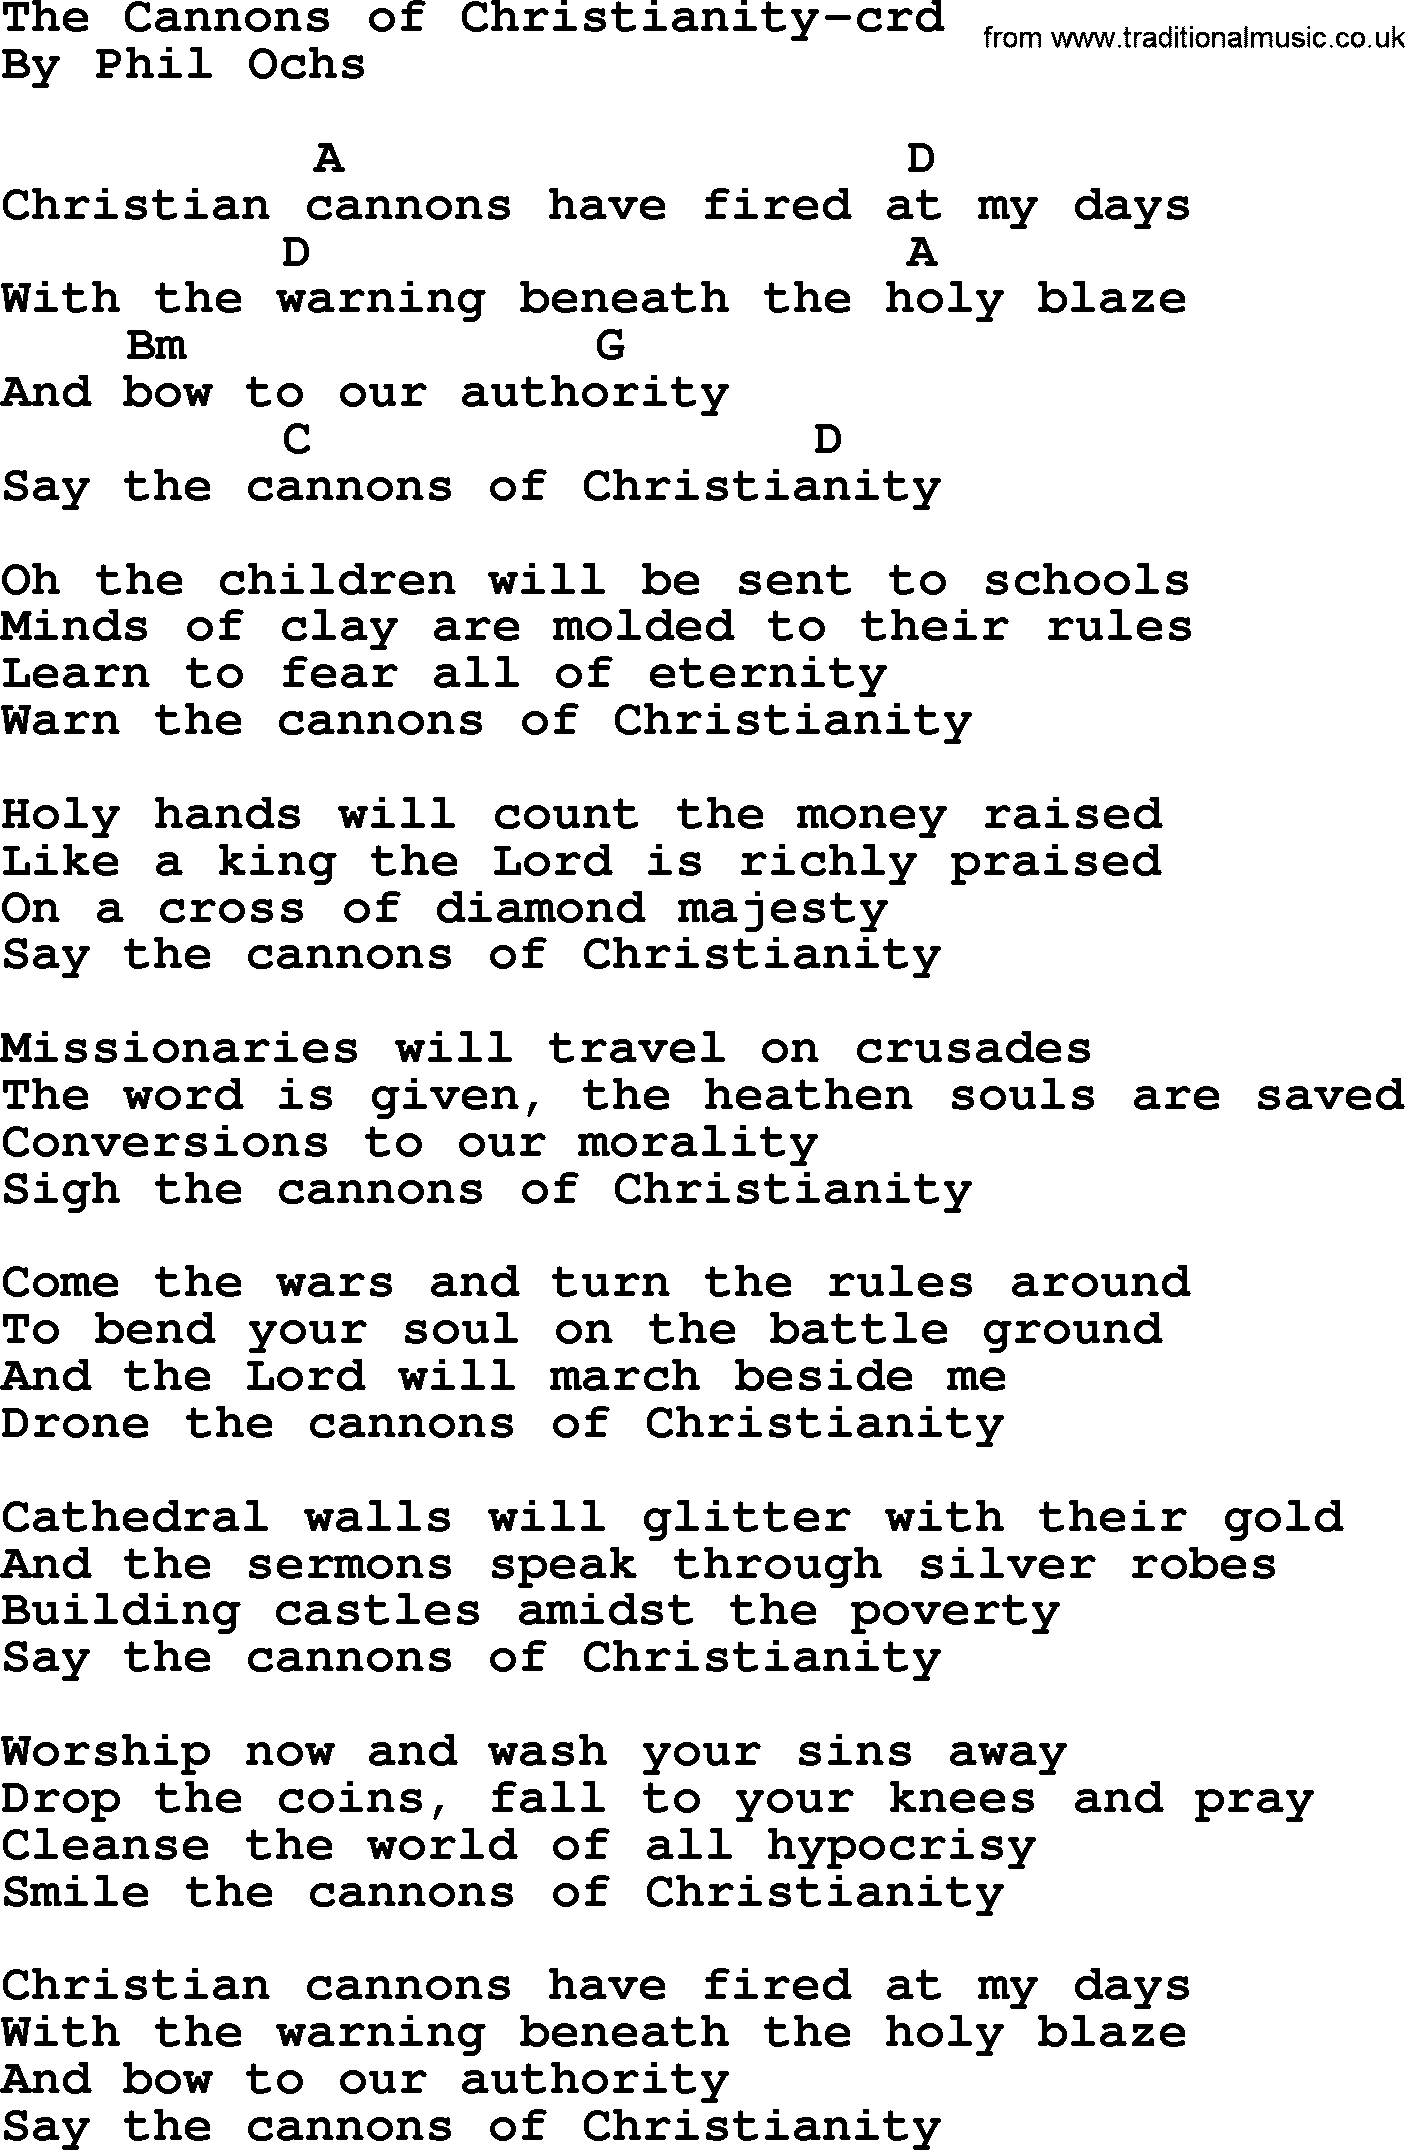 Phil Ochs song The Cannons Of Christianity- by Phil Ochs, lyrics and chords